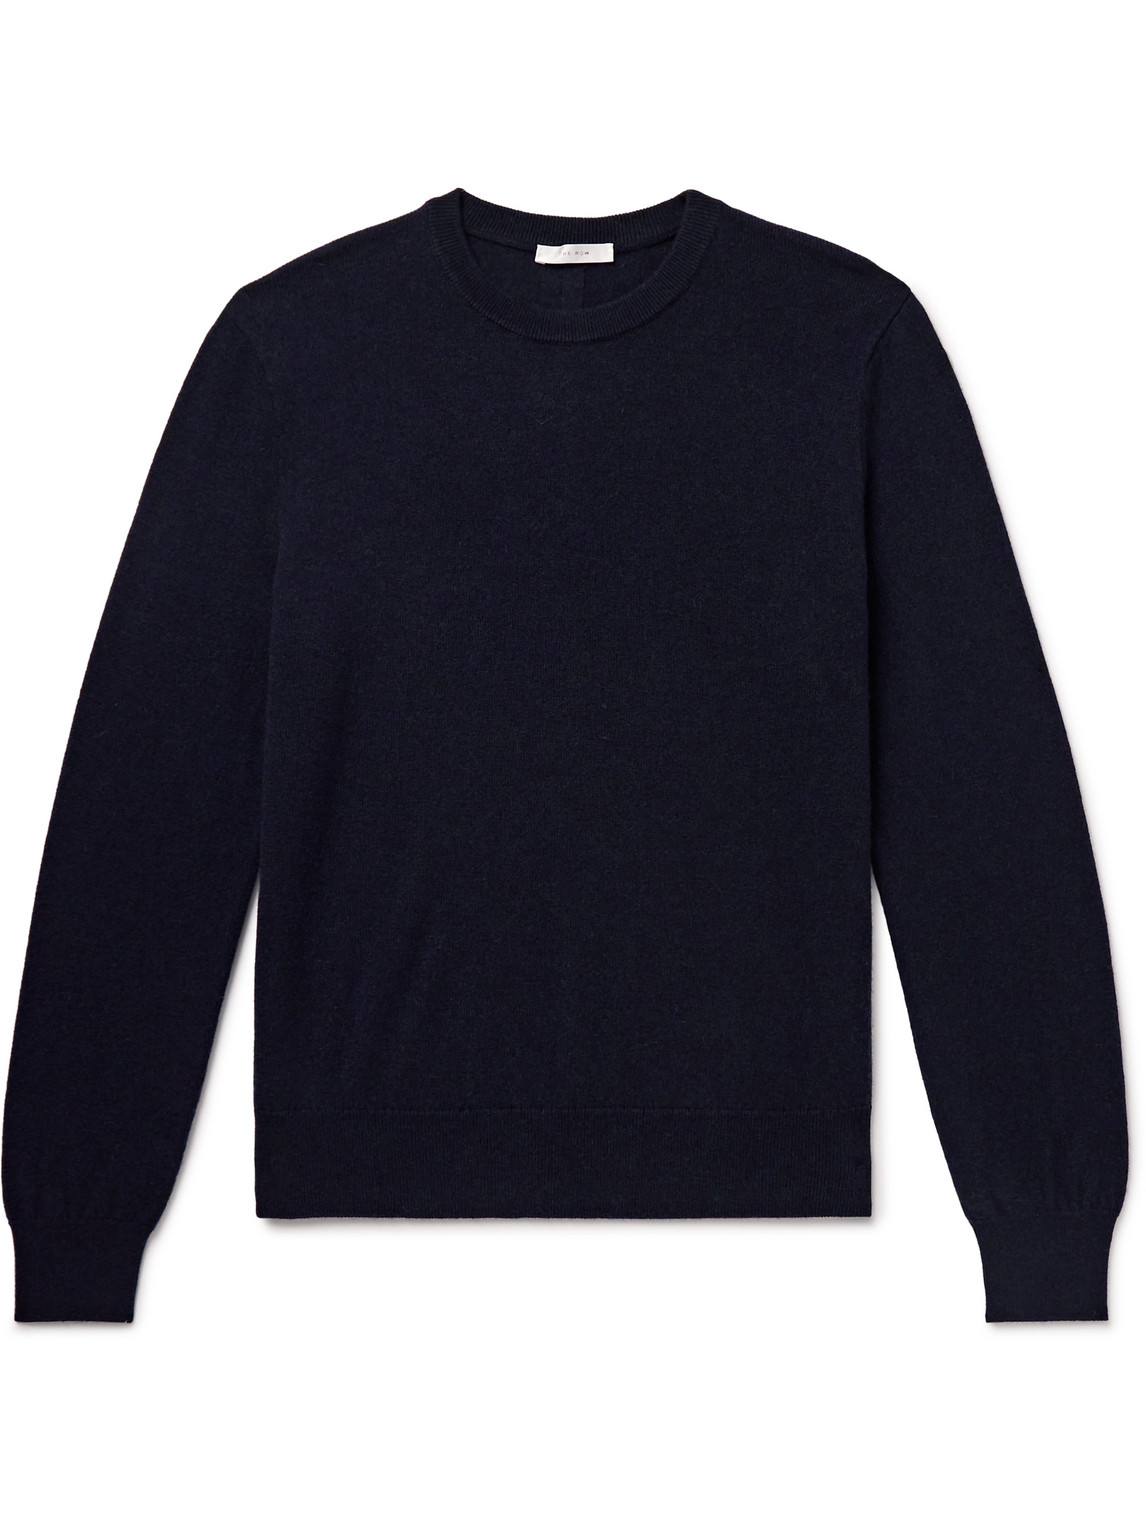 Shop The Row Benji Cashmere Sweater In Black